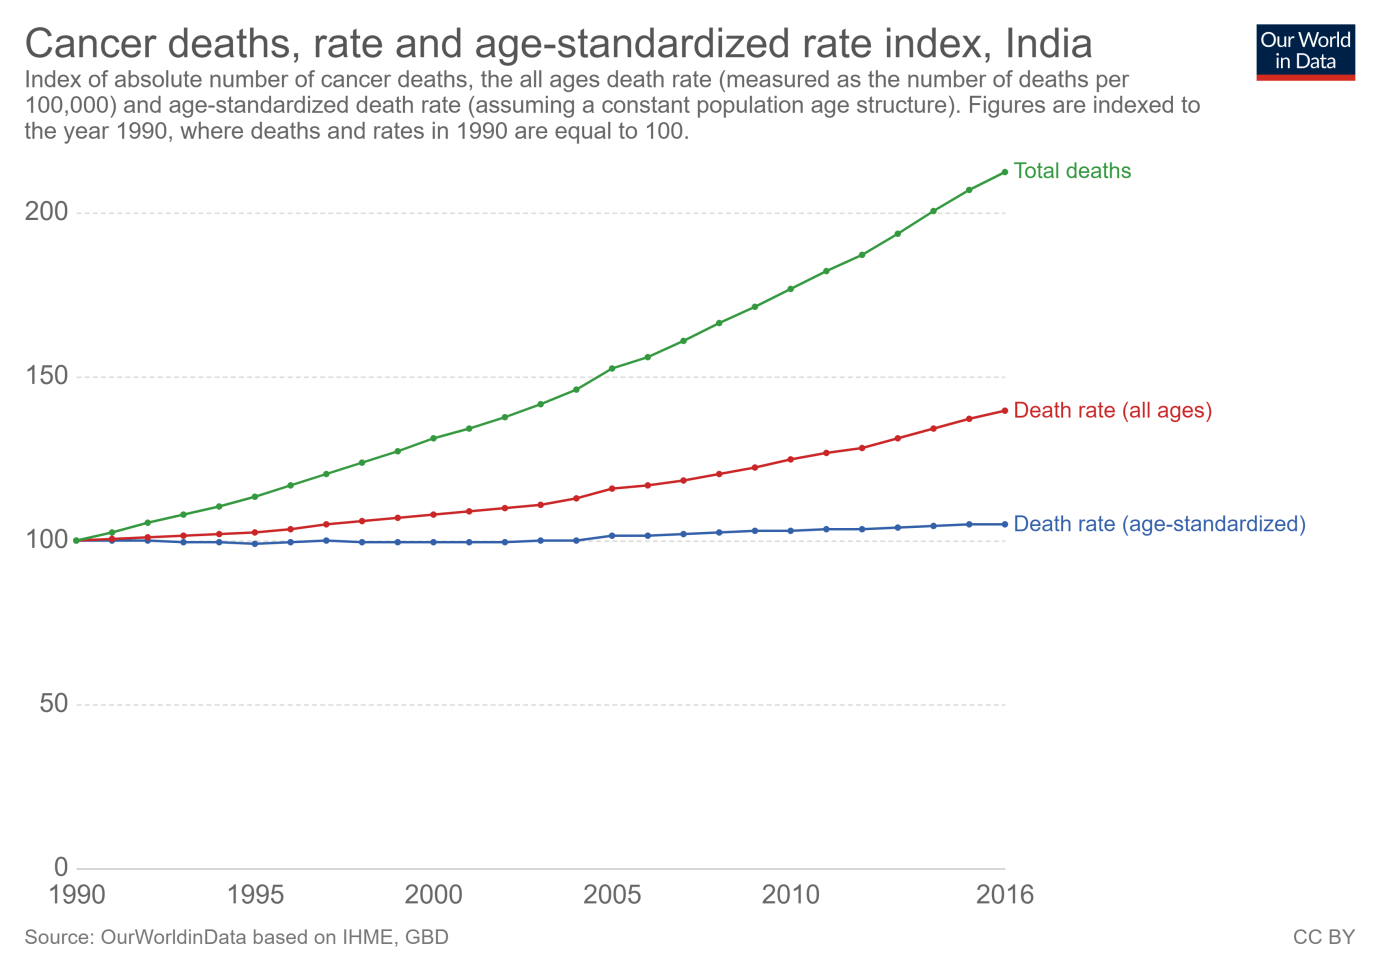 age adjusted death rate from cancer in India is increasing